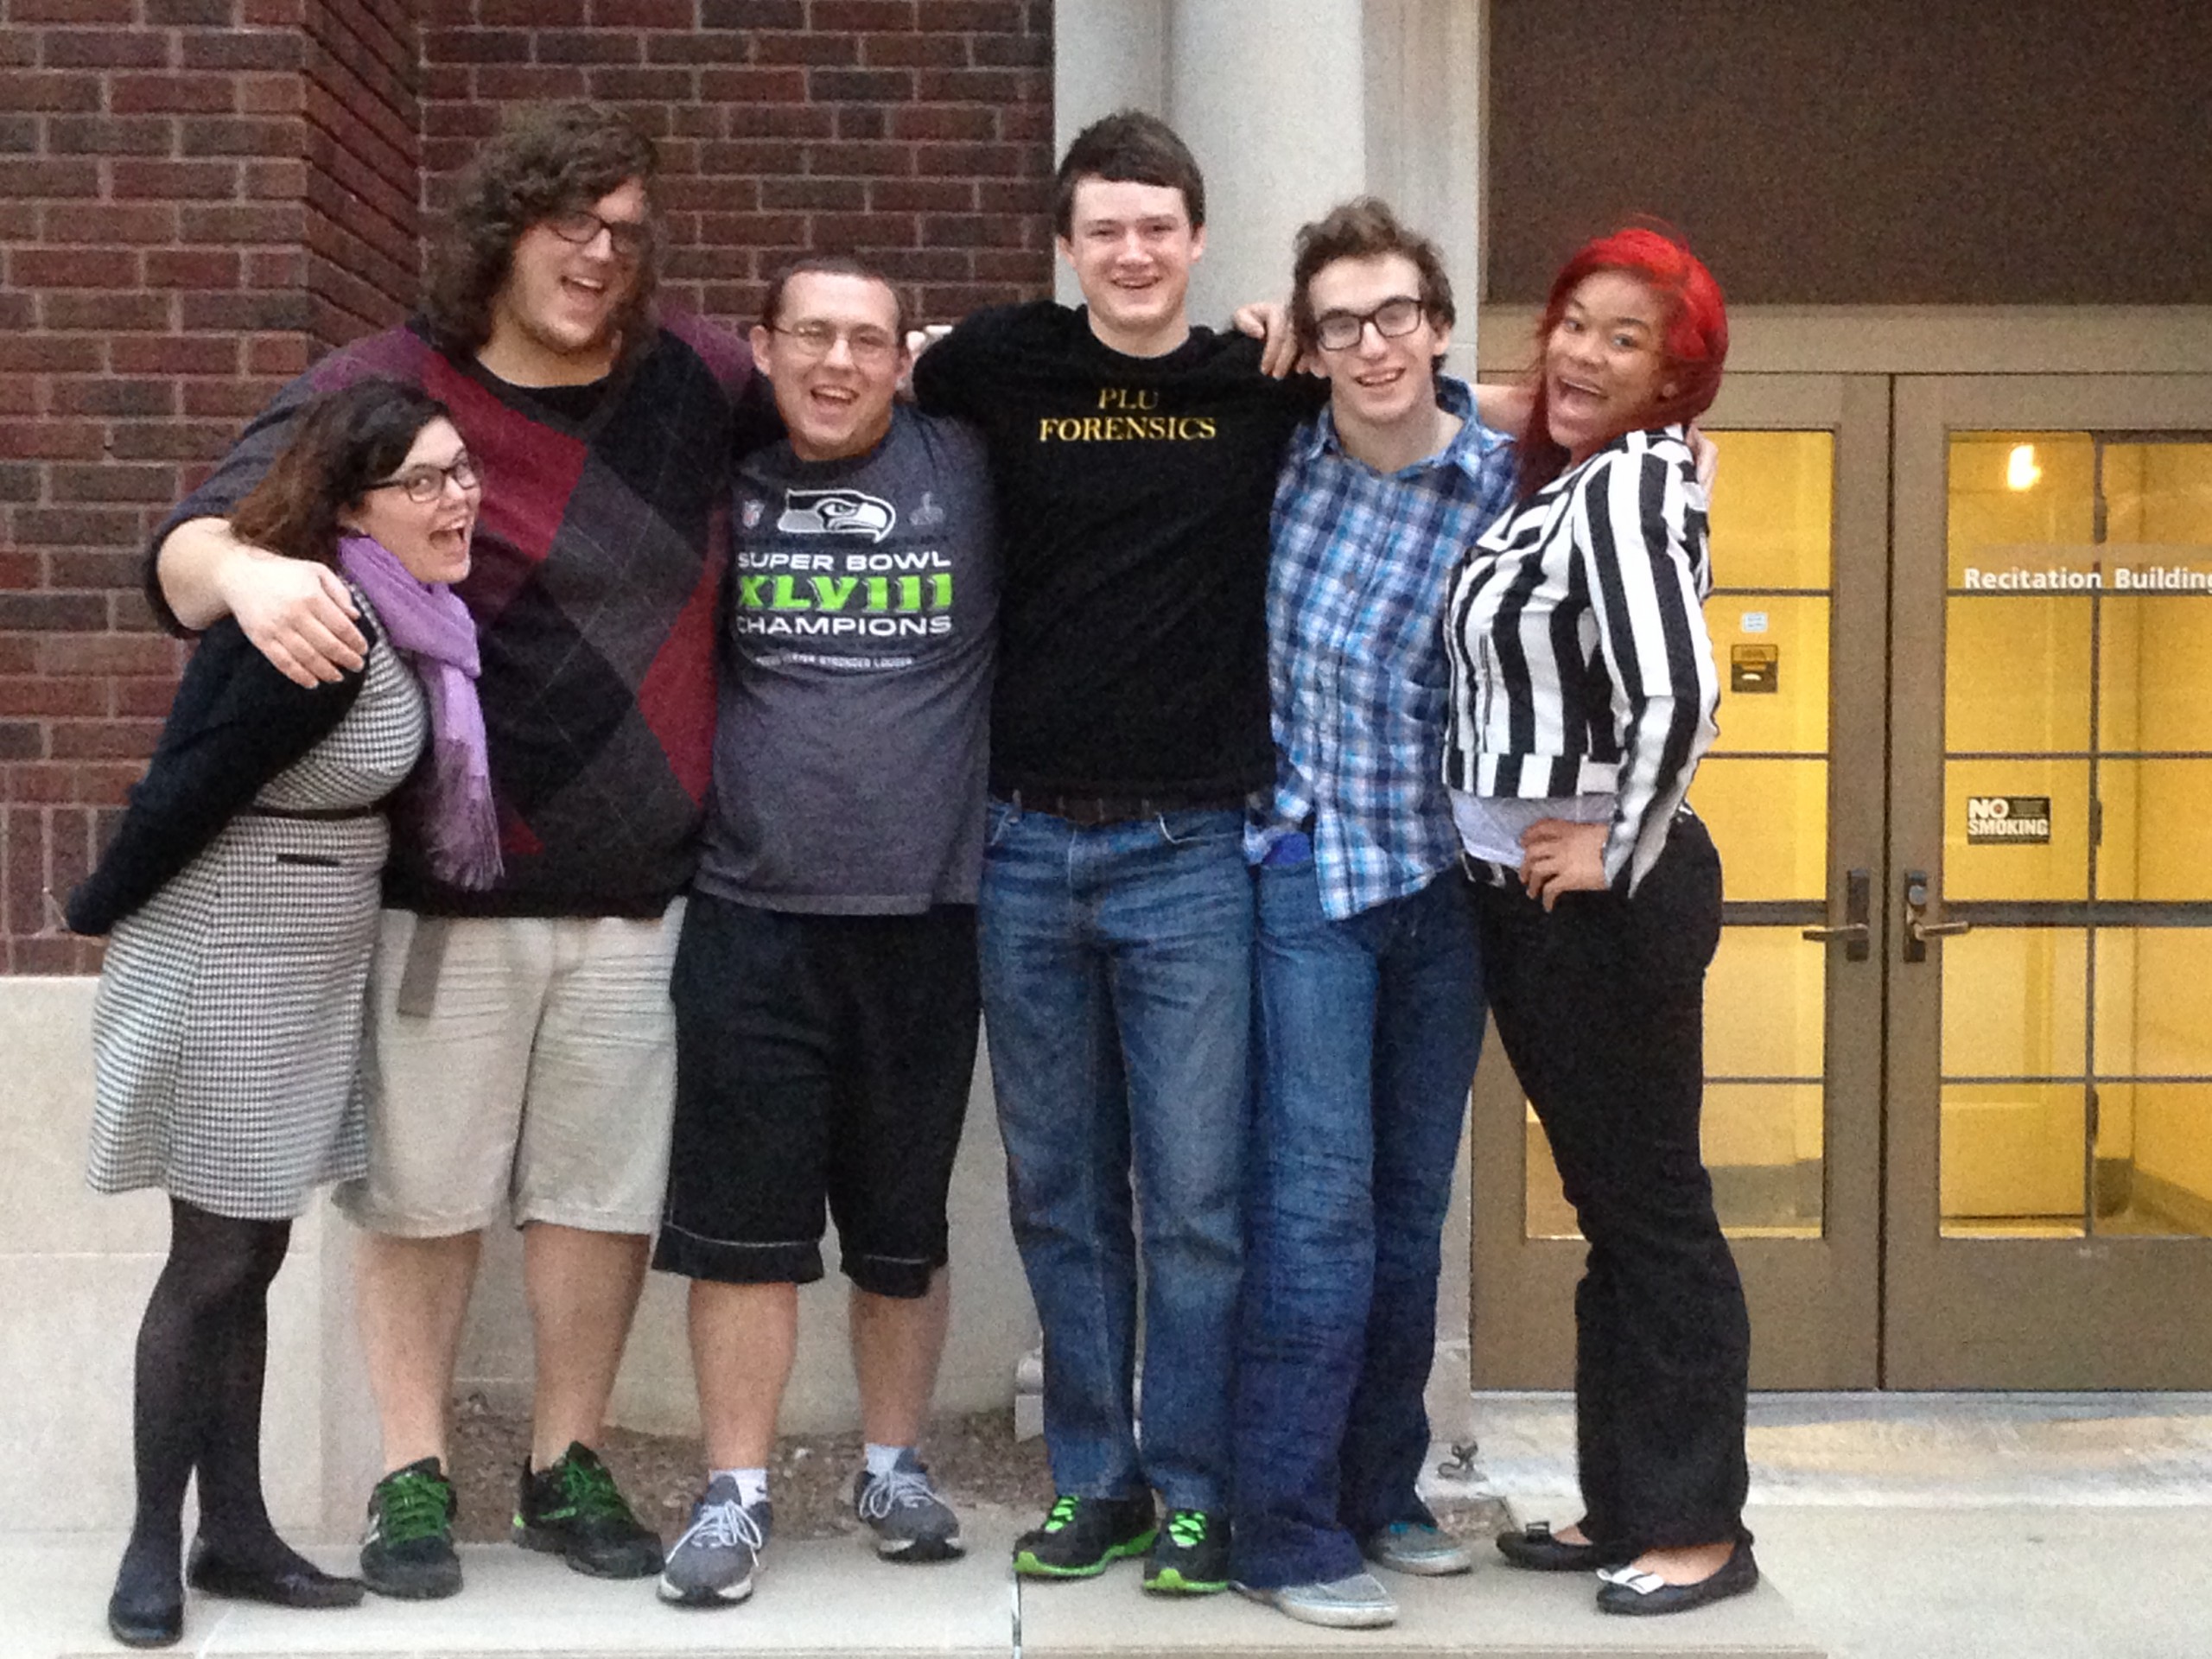 PLU sent six Speech and Debate members (from left: Pam Barker, David Mooney, Chris Fournier, Brendan Stanten, Andrew Tinker and Mamie Howard) to the national competition at Purdue University April 11-12.